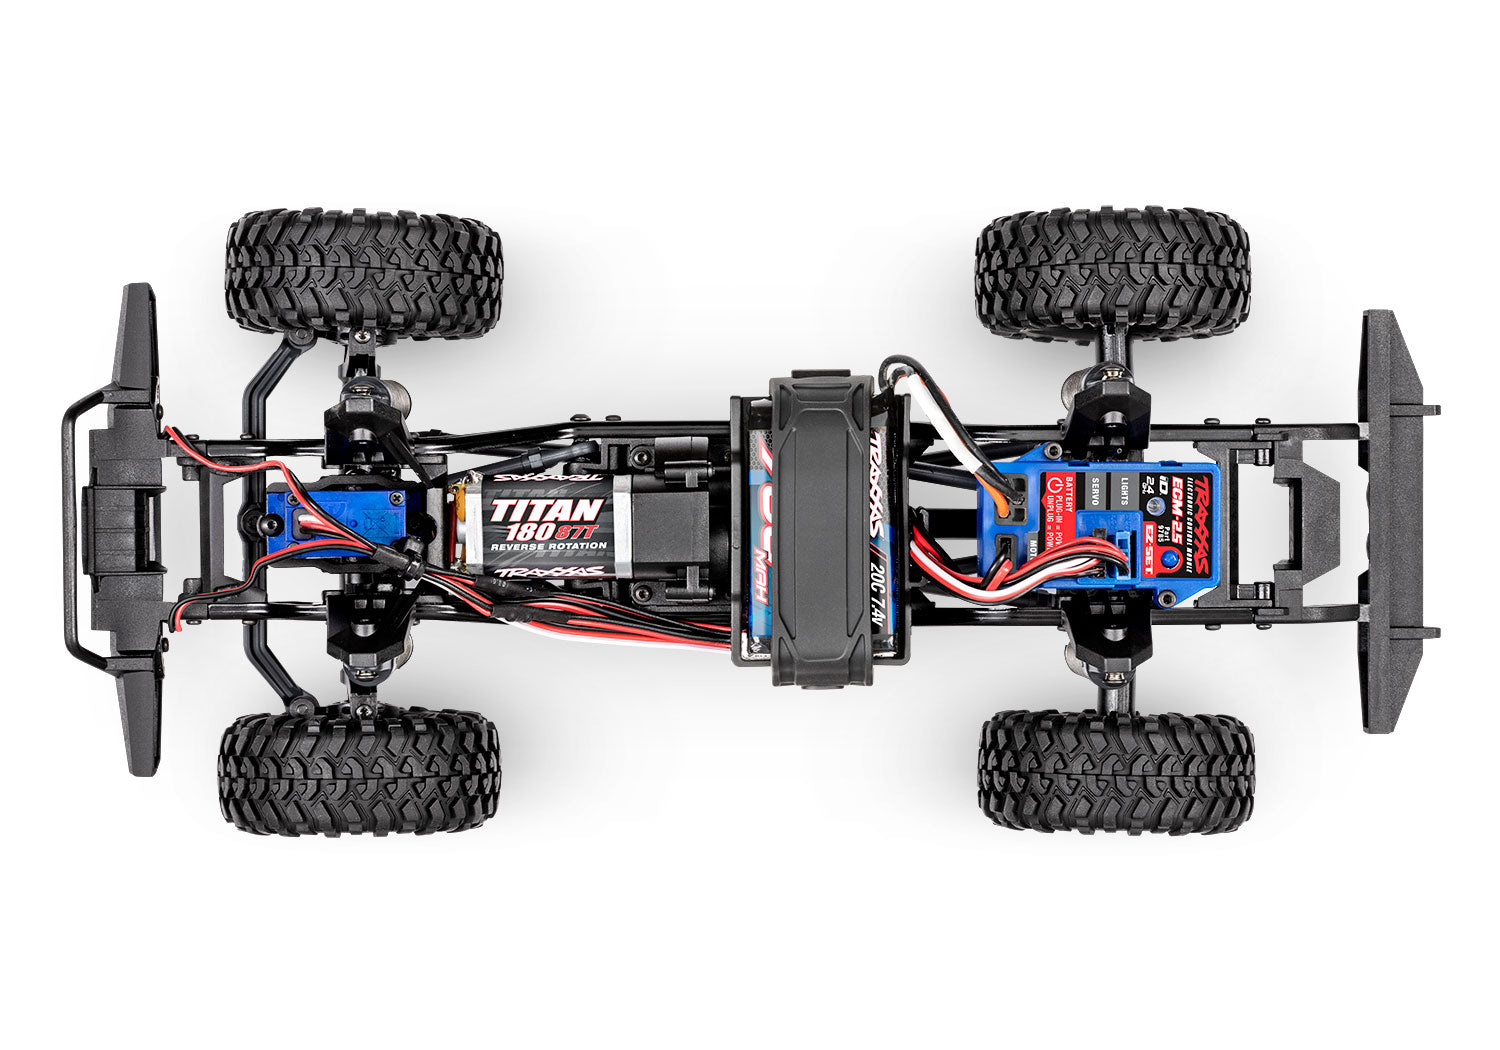 Traxxas TRX4M Upgrades!! Crawler Gear and Speed Gear Install & Review - BIG  Performance Gains! 